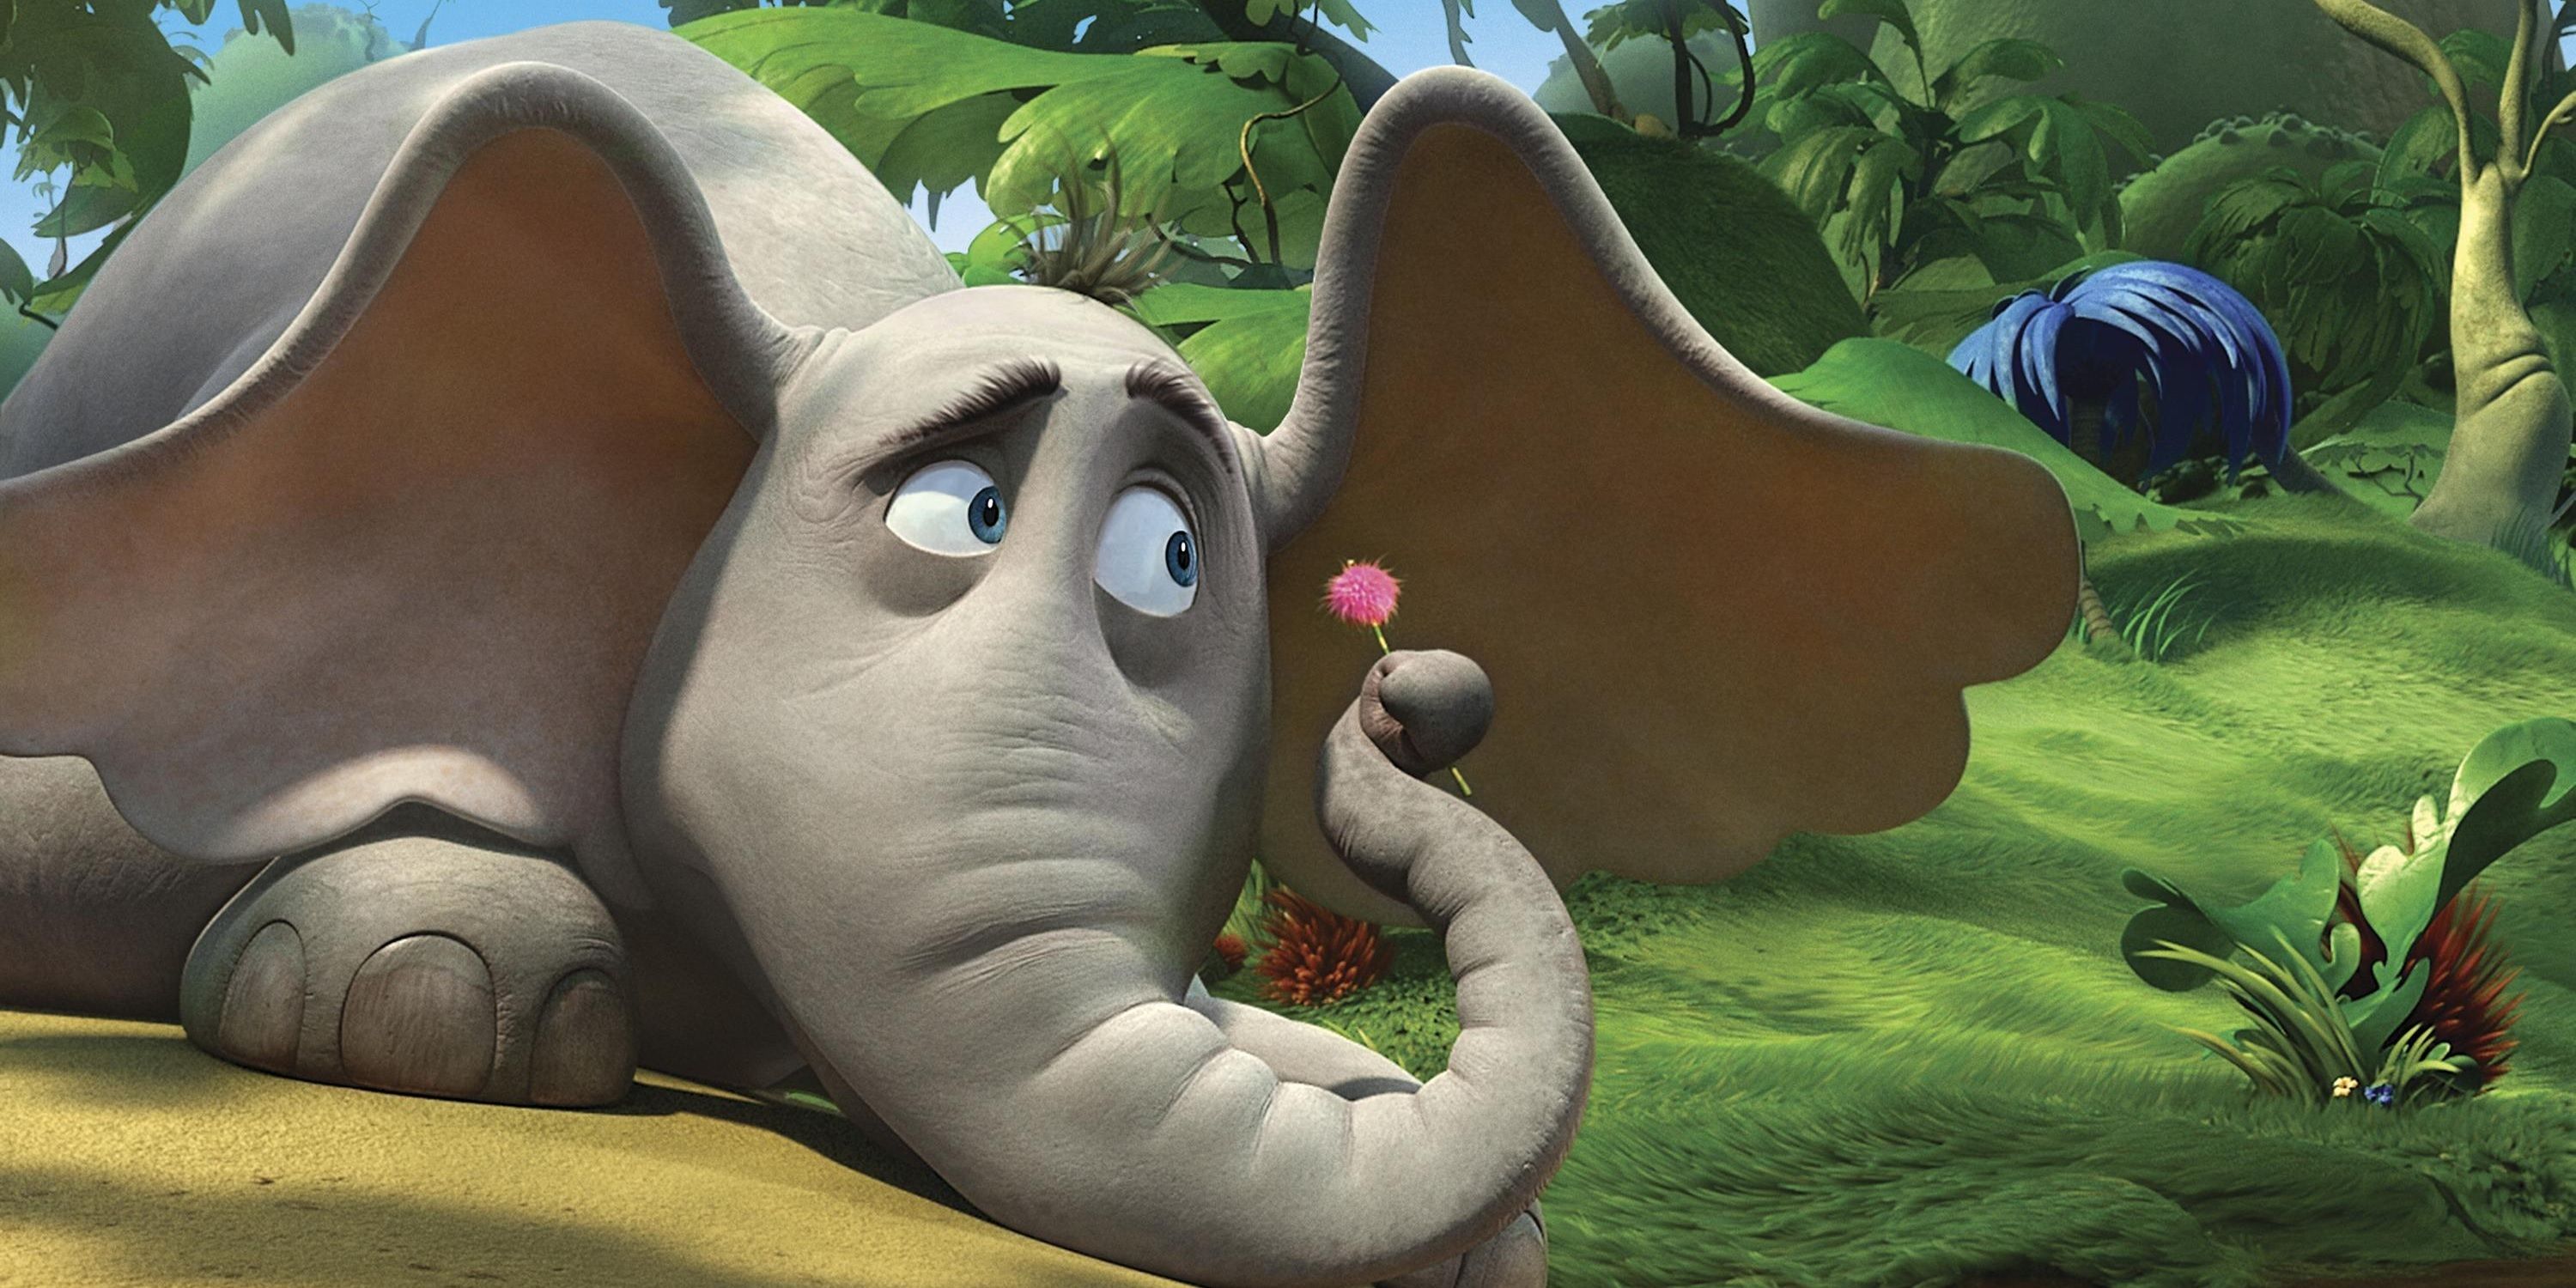 Horton looks at a flower in Horton Hears a Who!